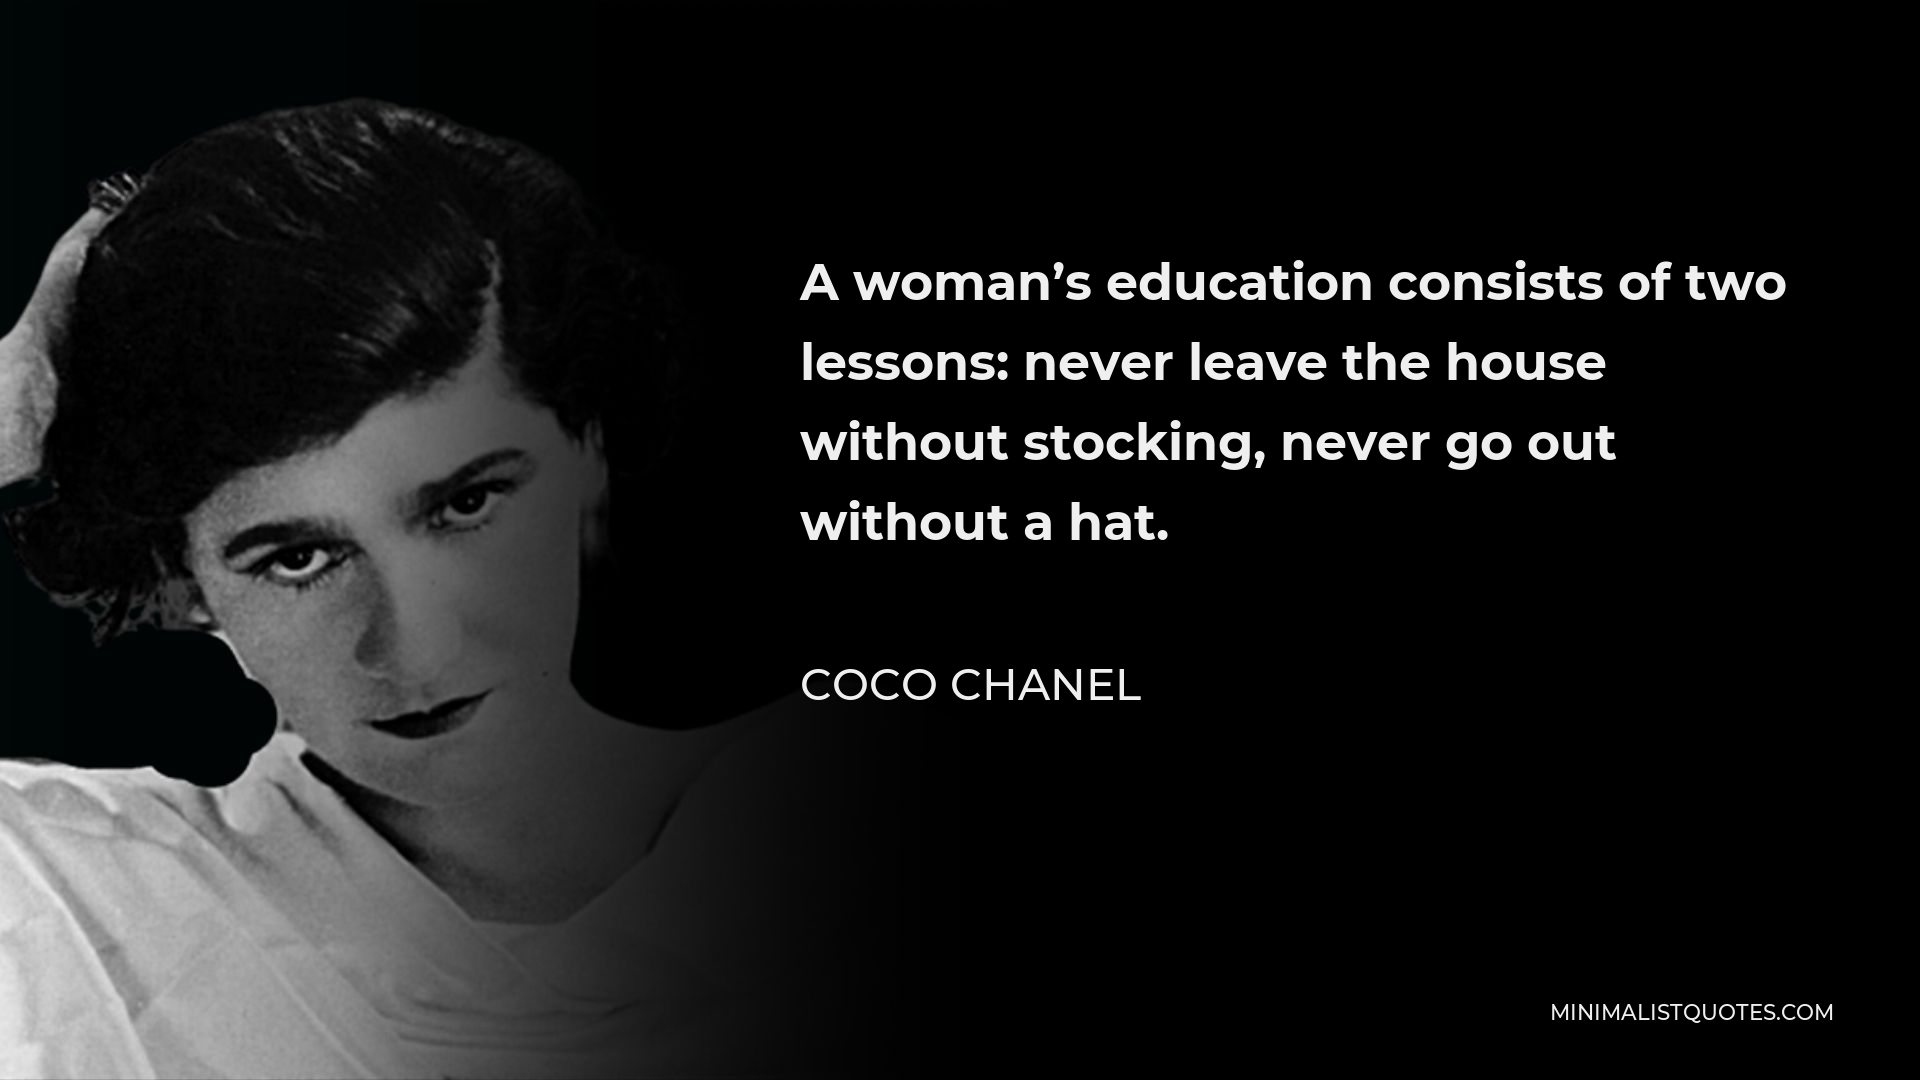 Coco Chanel Quote - A woman’s education consists of two lessons: never leave the house without stocking, never go out without a hat.